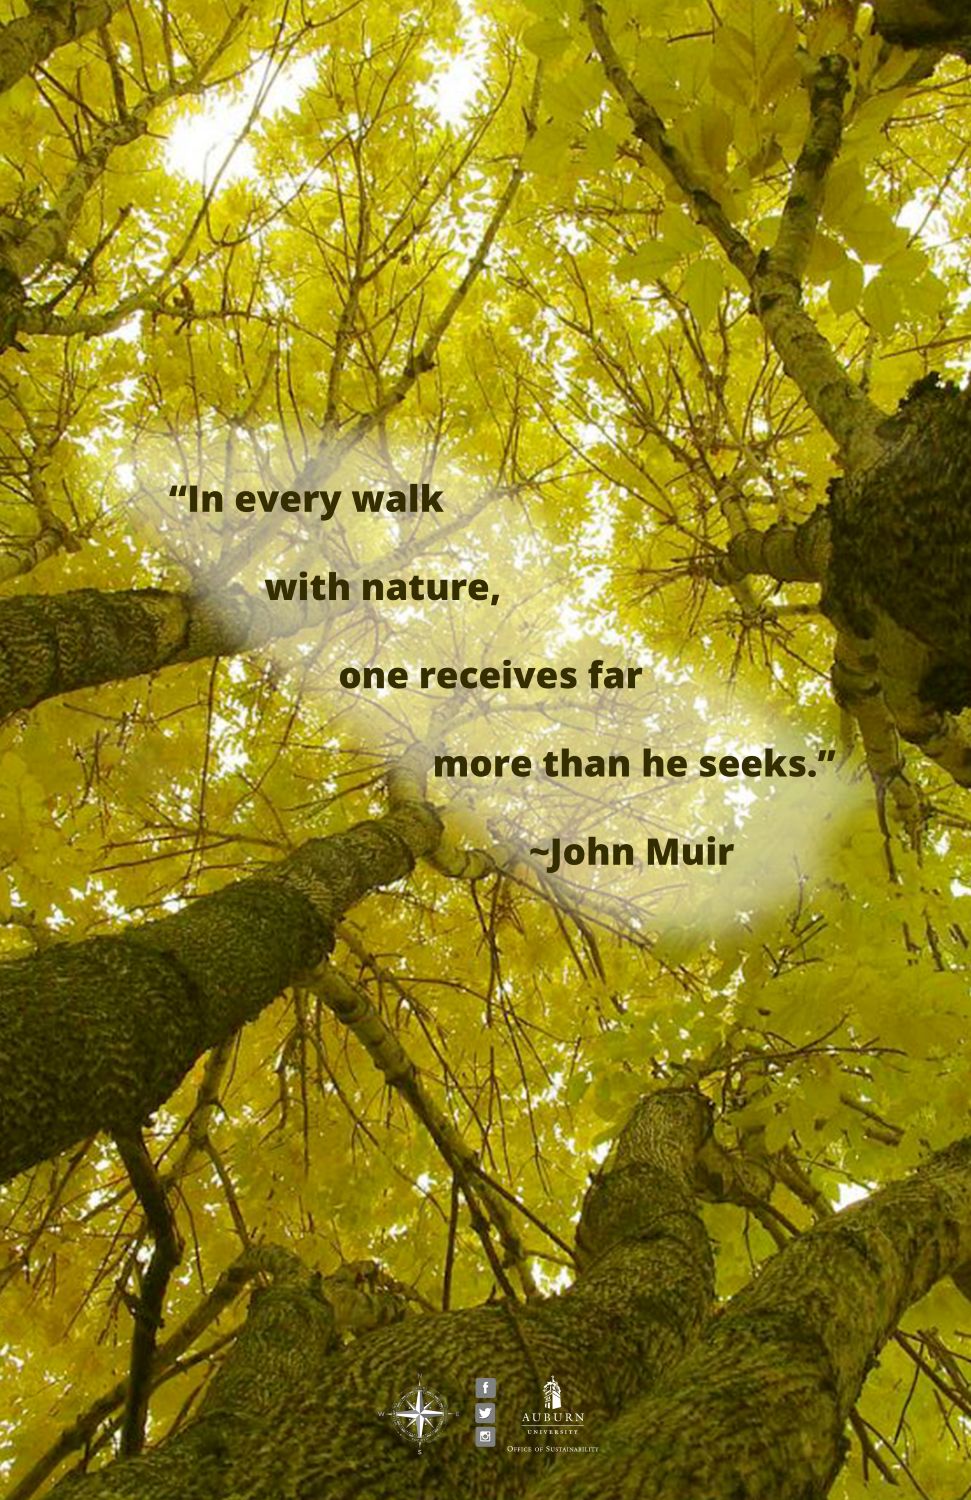 Graphic with John Muir quote: "In every walk with nature, one receives far more than he seeks."